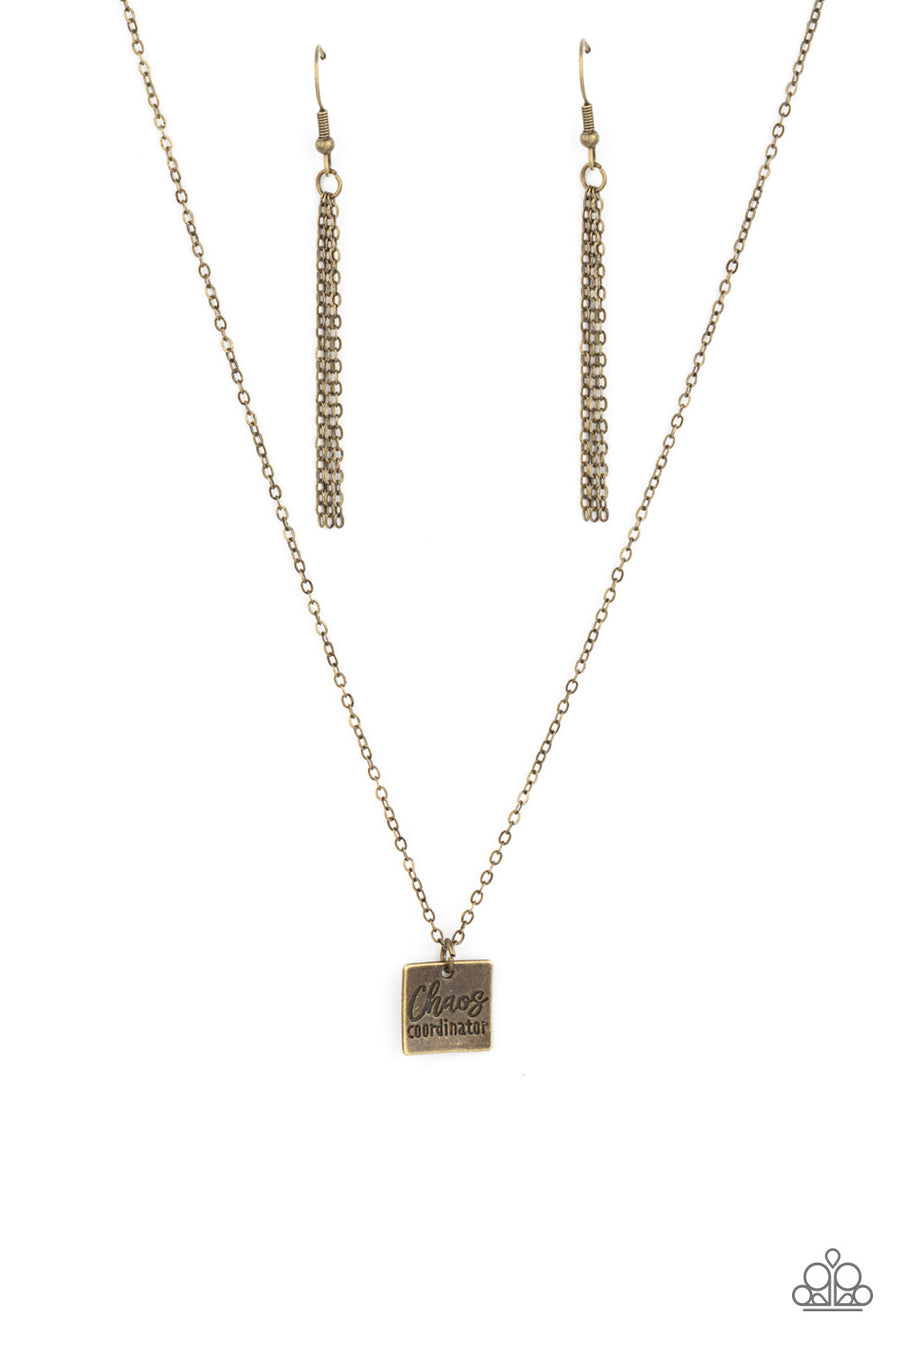 Chaos Coordinator - Brass Necklace - Paparazzi Accessories - A curved brass square engraved with the words "Chaos Coordinator" dangles from a brass chain creating a playful medallion below the collar. Features a